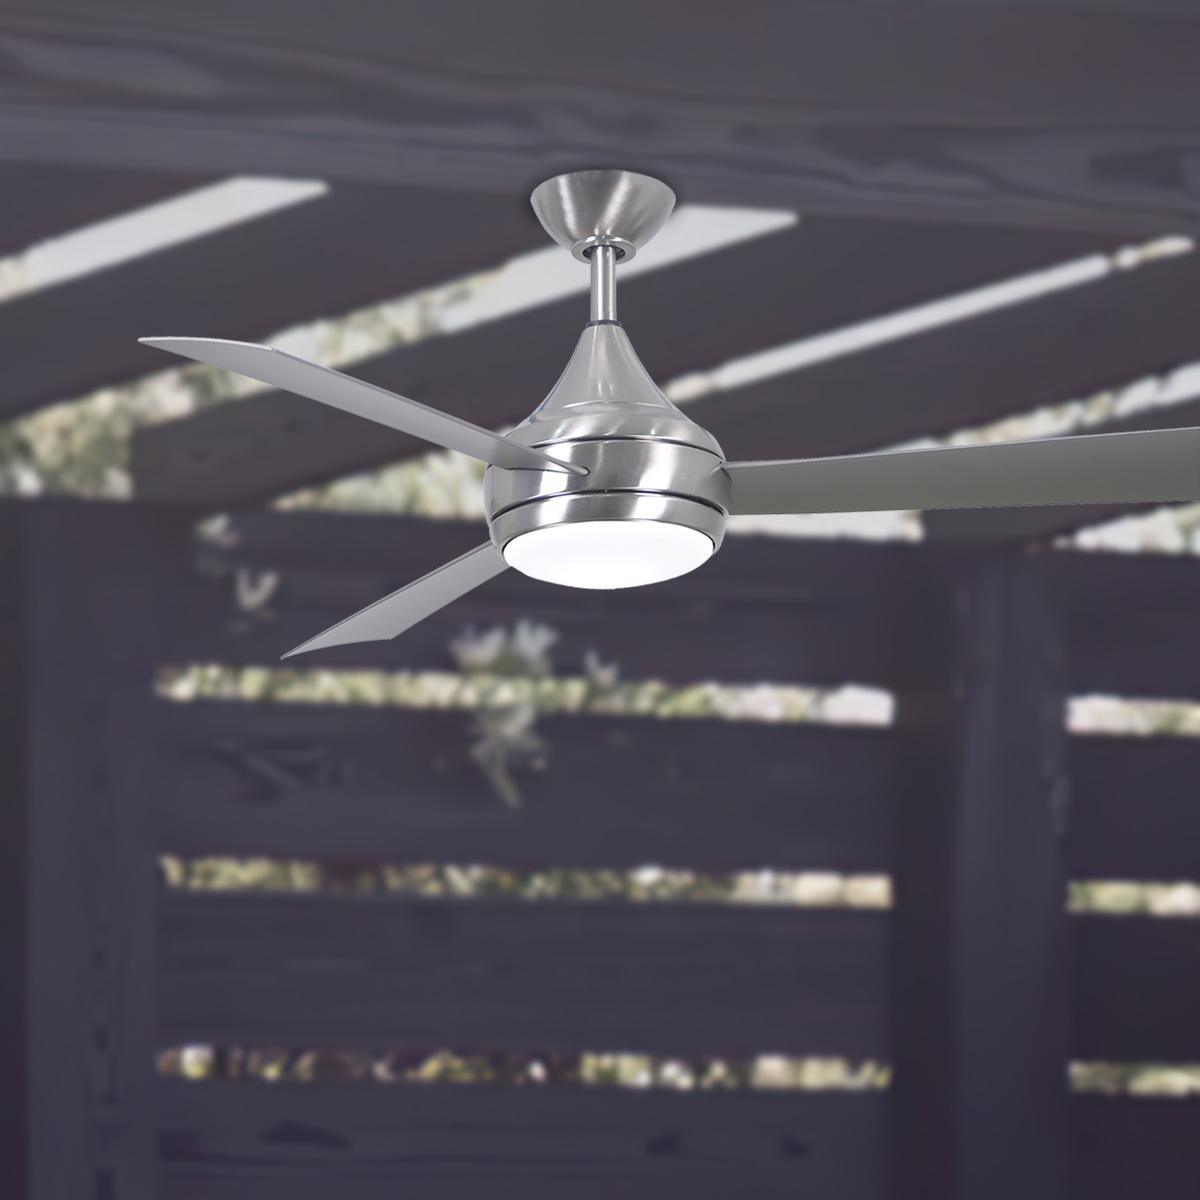 Donaire 52 Inch Propeller Outdoor Ceiling Fan With Light And Remote, Marine Grade